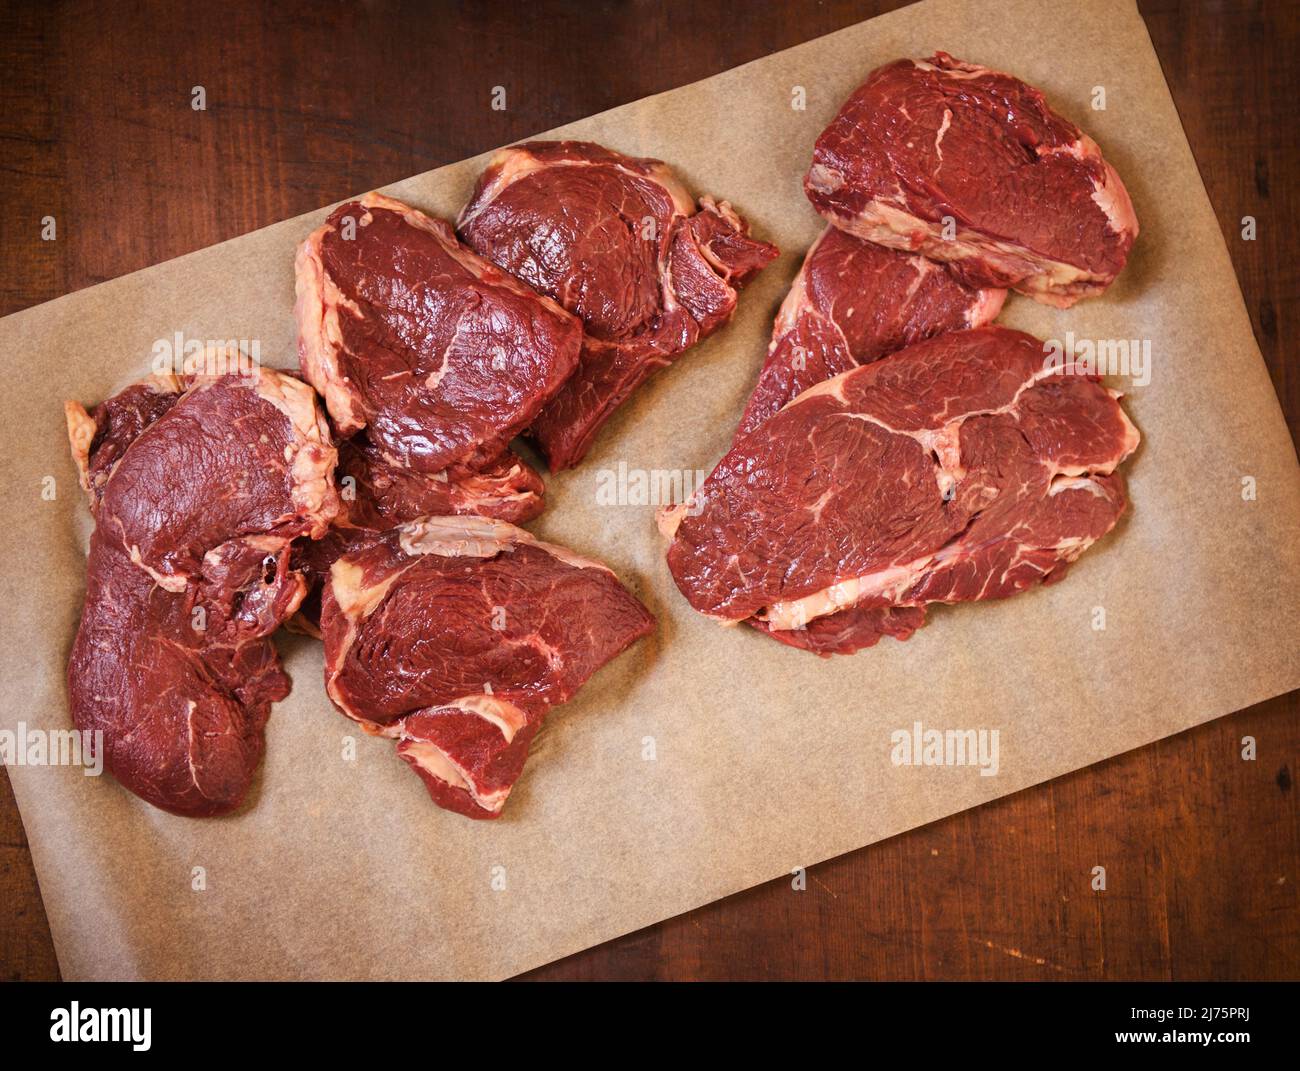 Grass Fed Sirloin Steaks on Parchment Paper Stock Photo